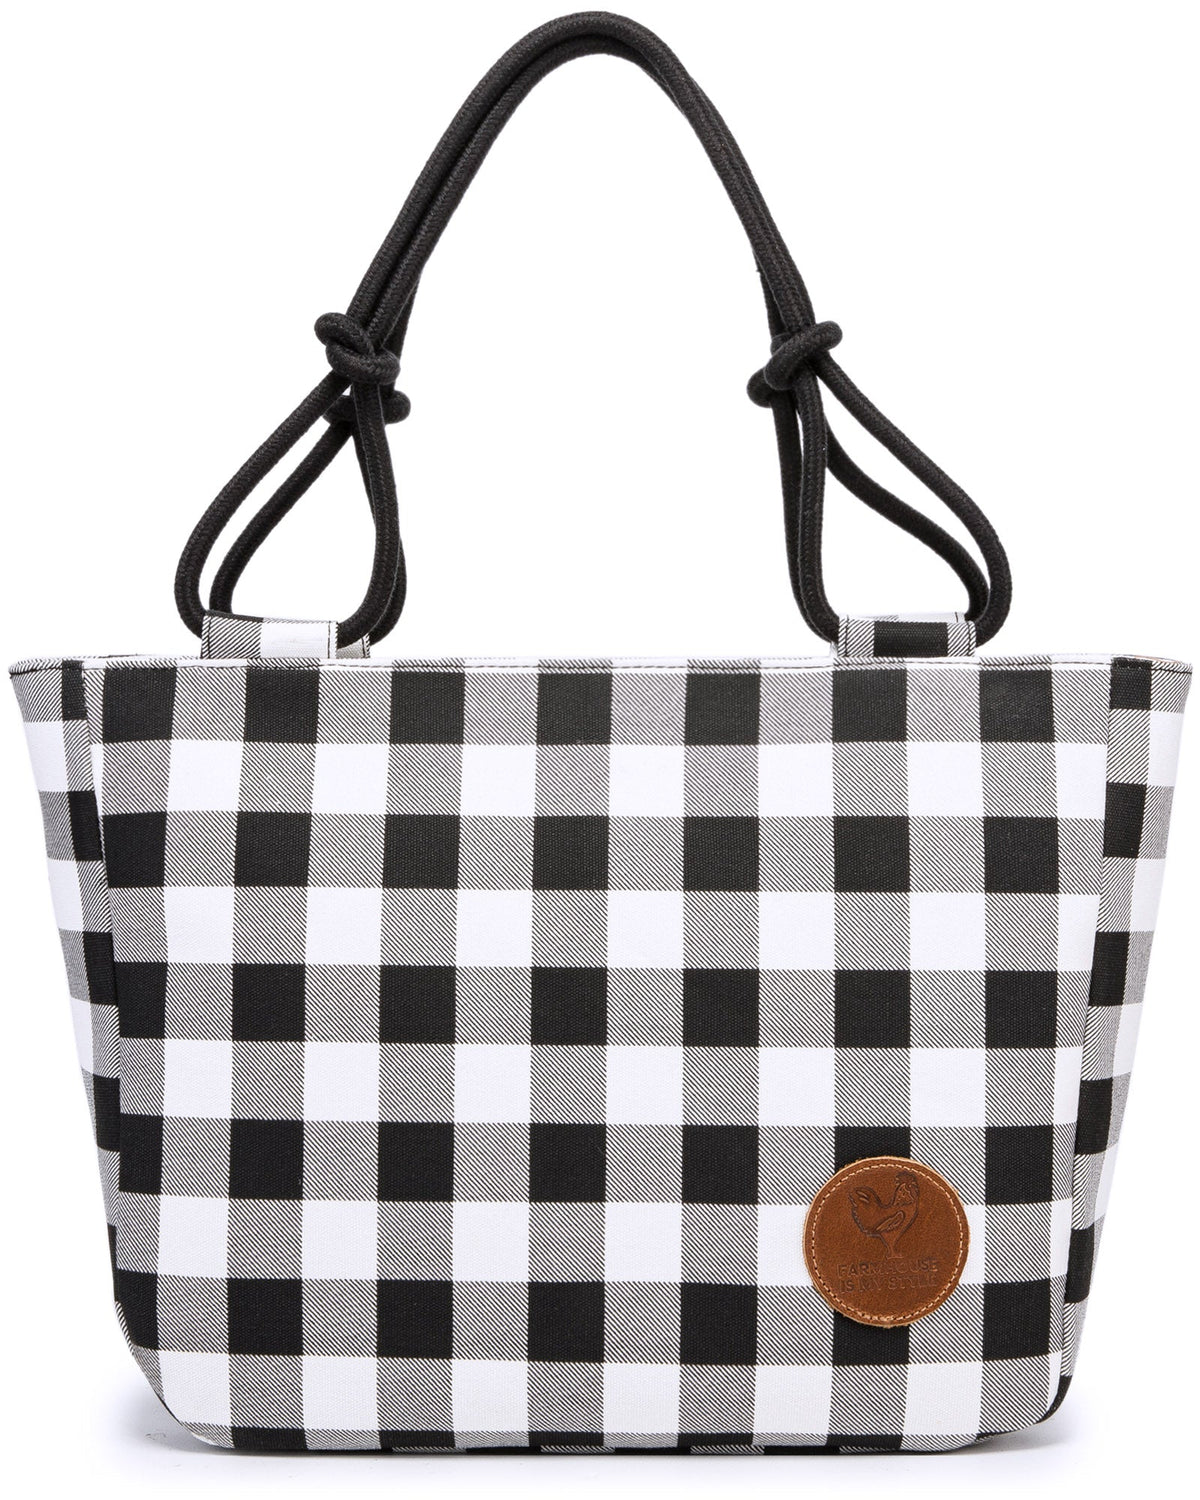 White Check Bag *BEST SELLER* - Farmhouse Is My Style